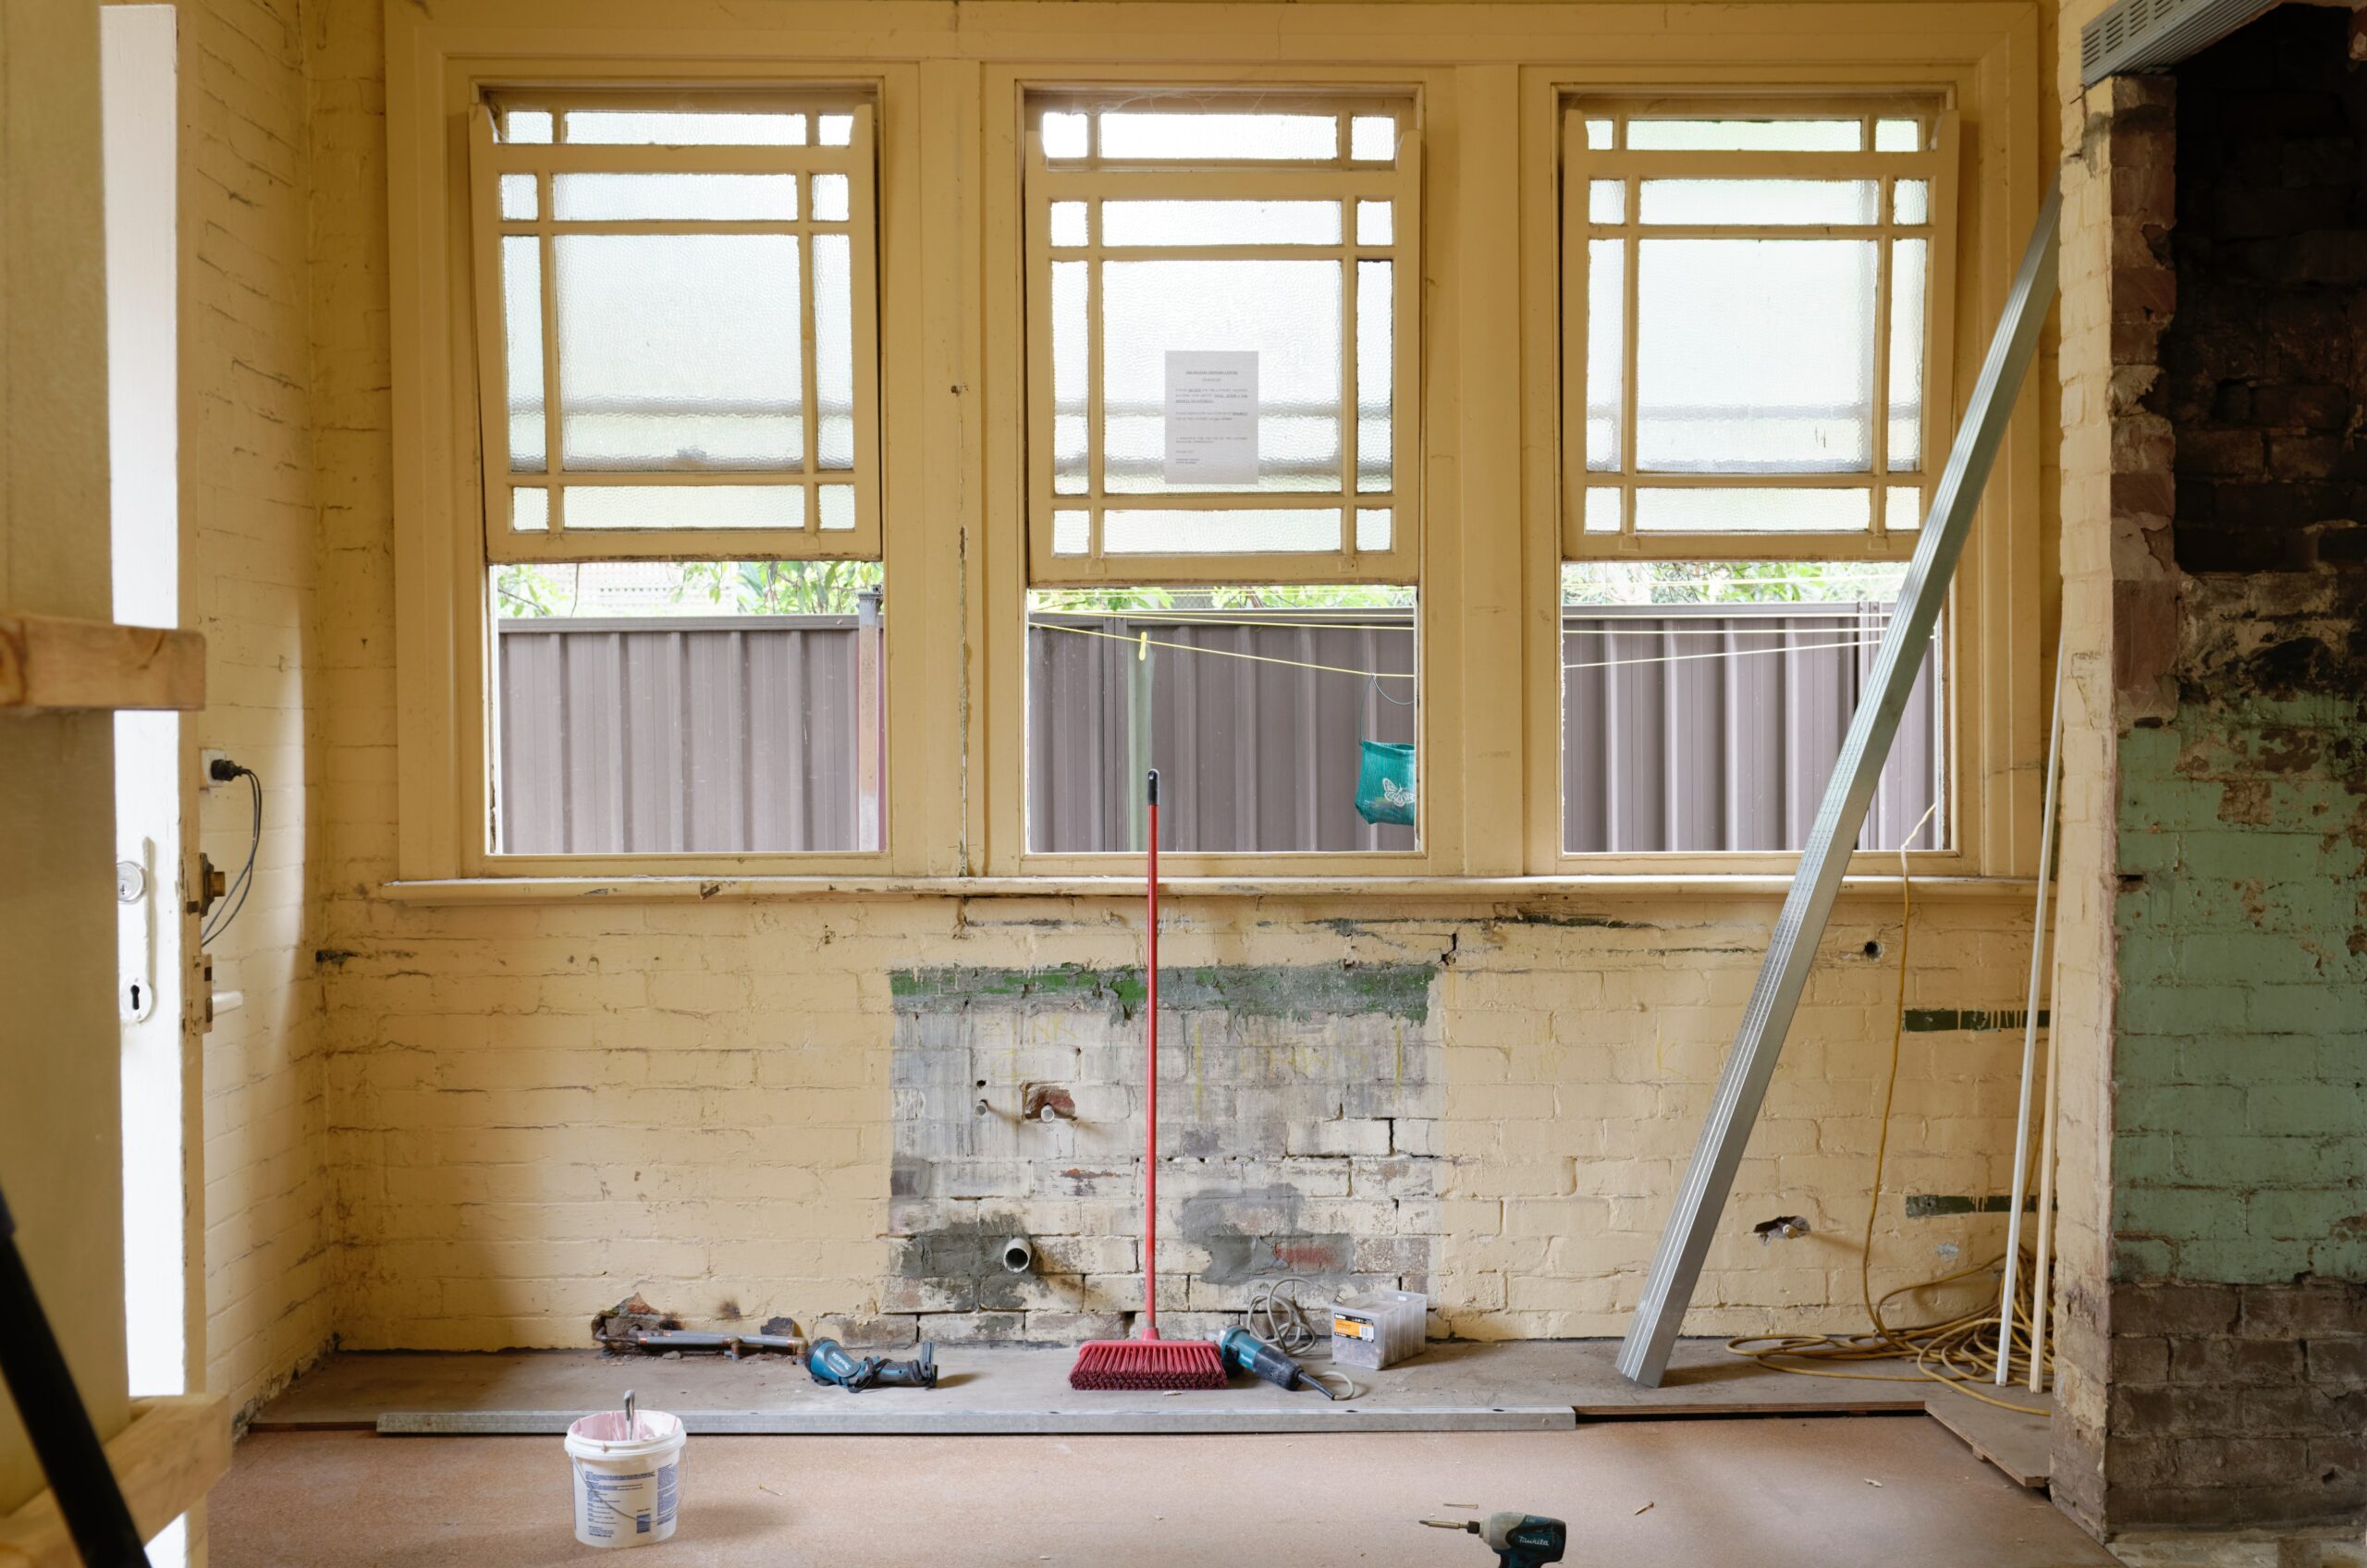 7 Point Checklist to Consider Before Deciding to Buy a Fixer-Upper.